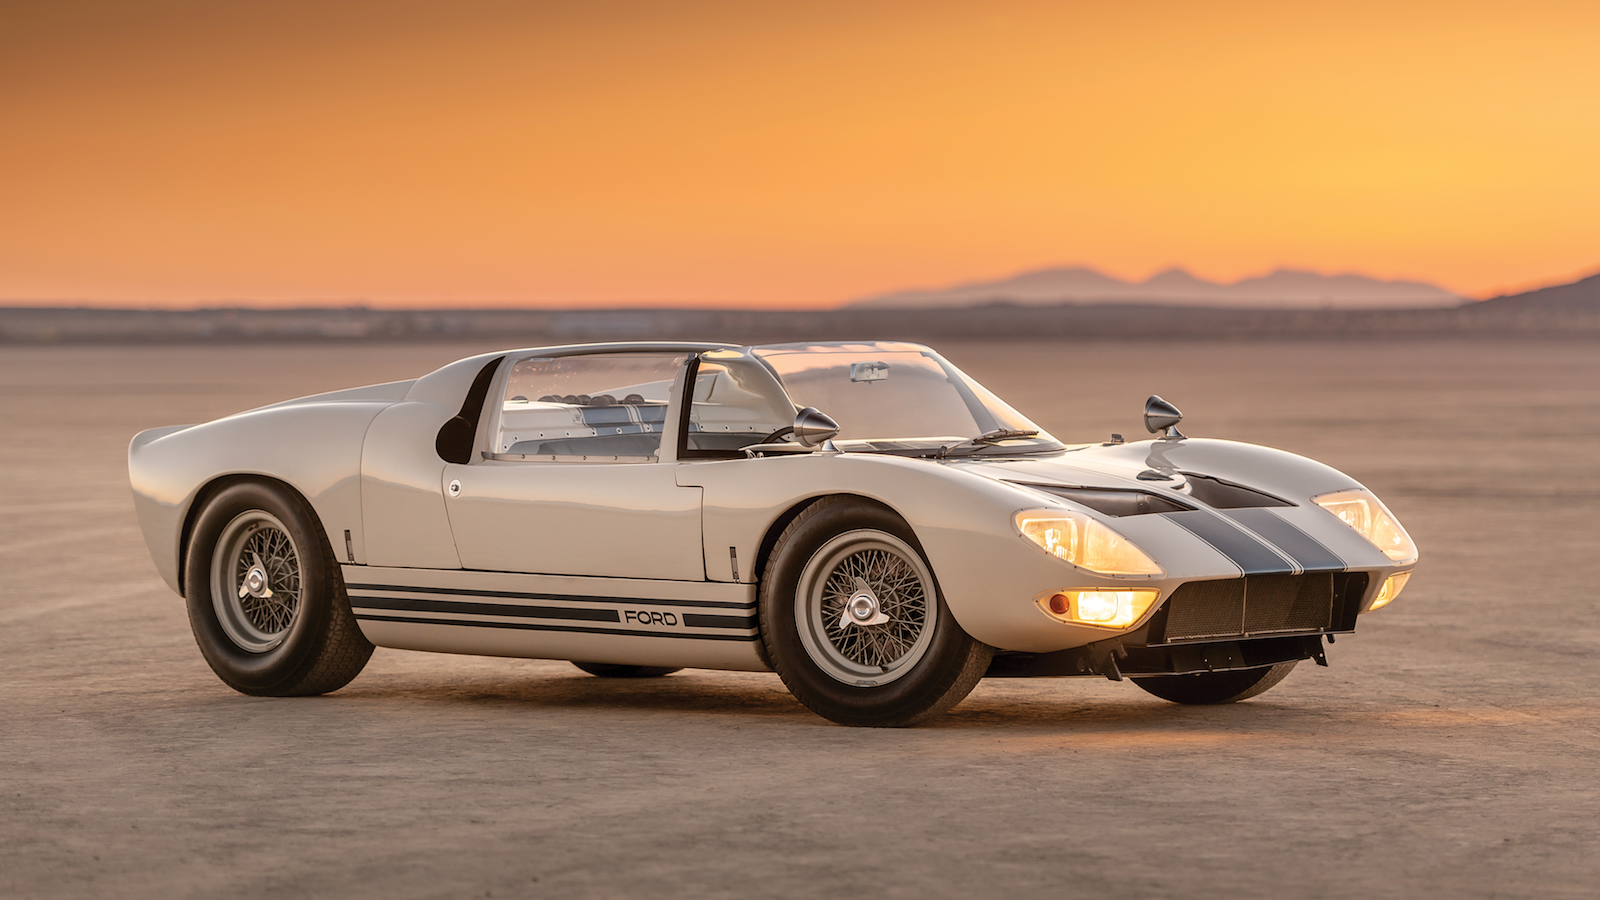 2019's most expensive classic cars